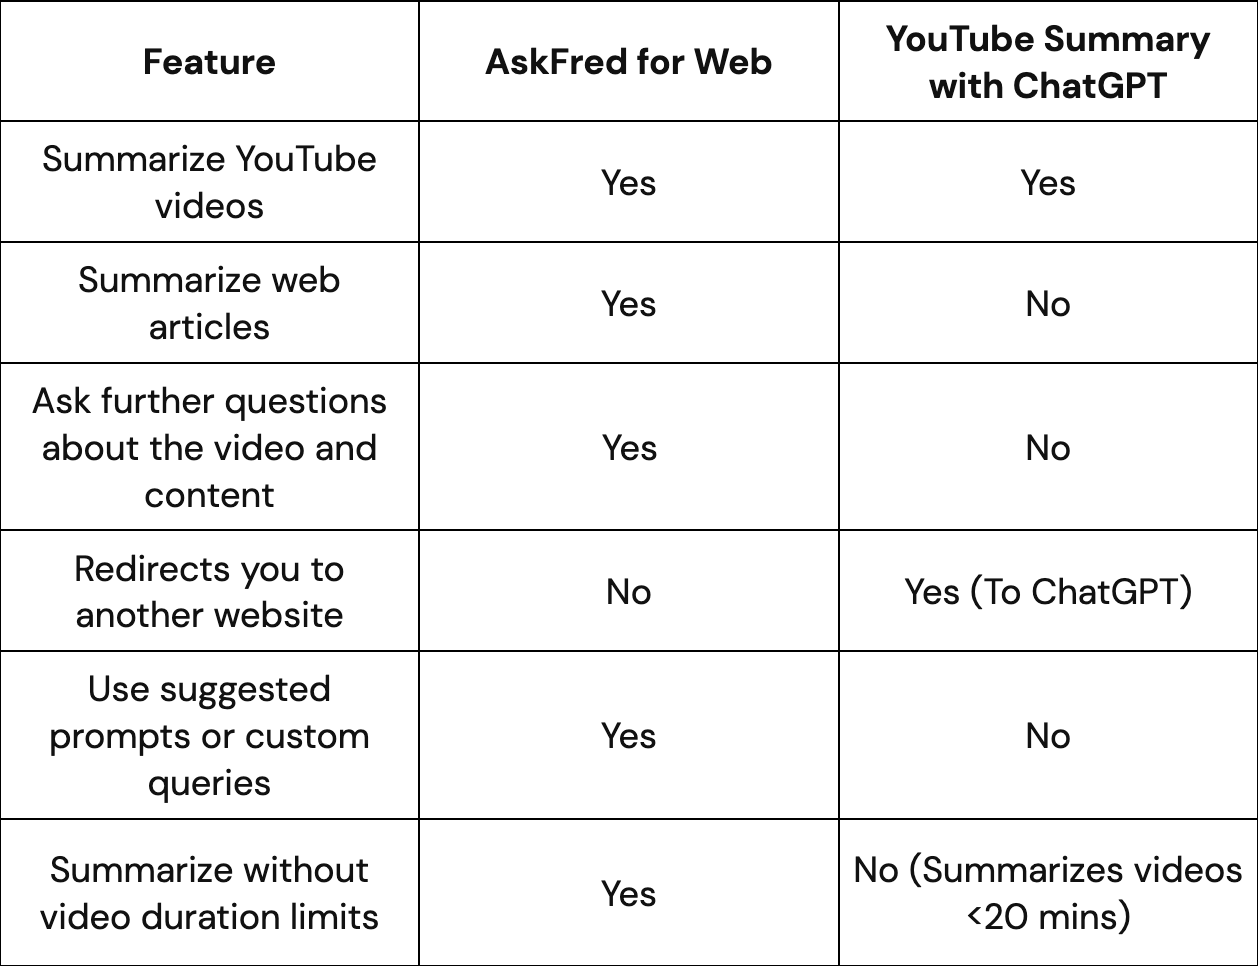 YouTube summary with ChatGPT vs. Fireflies AskFred for Web